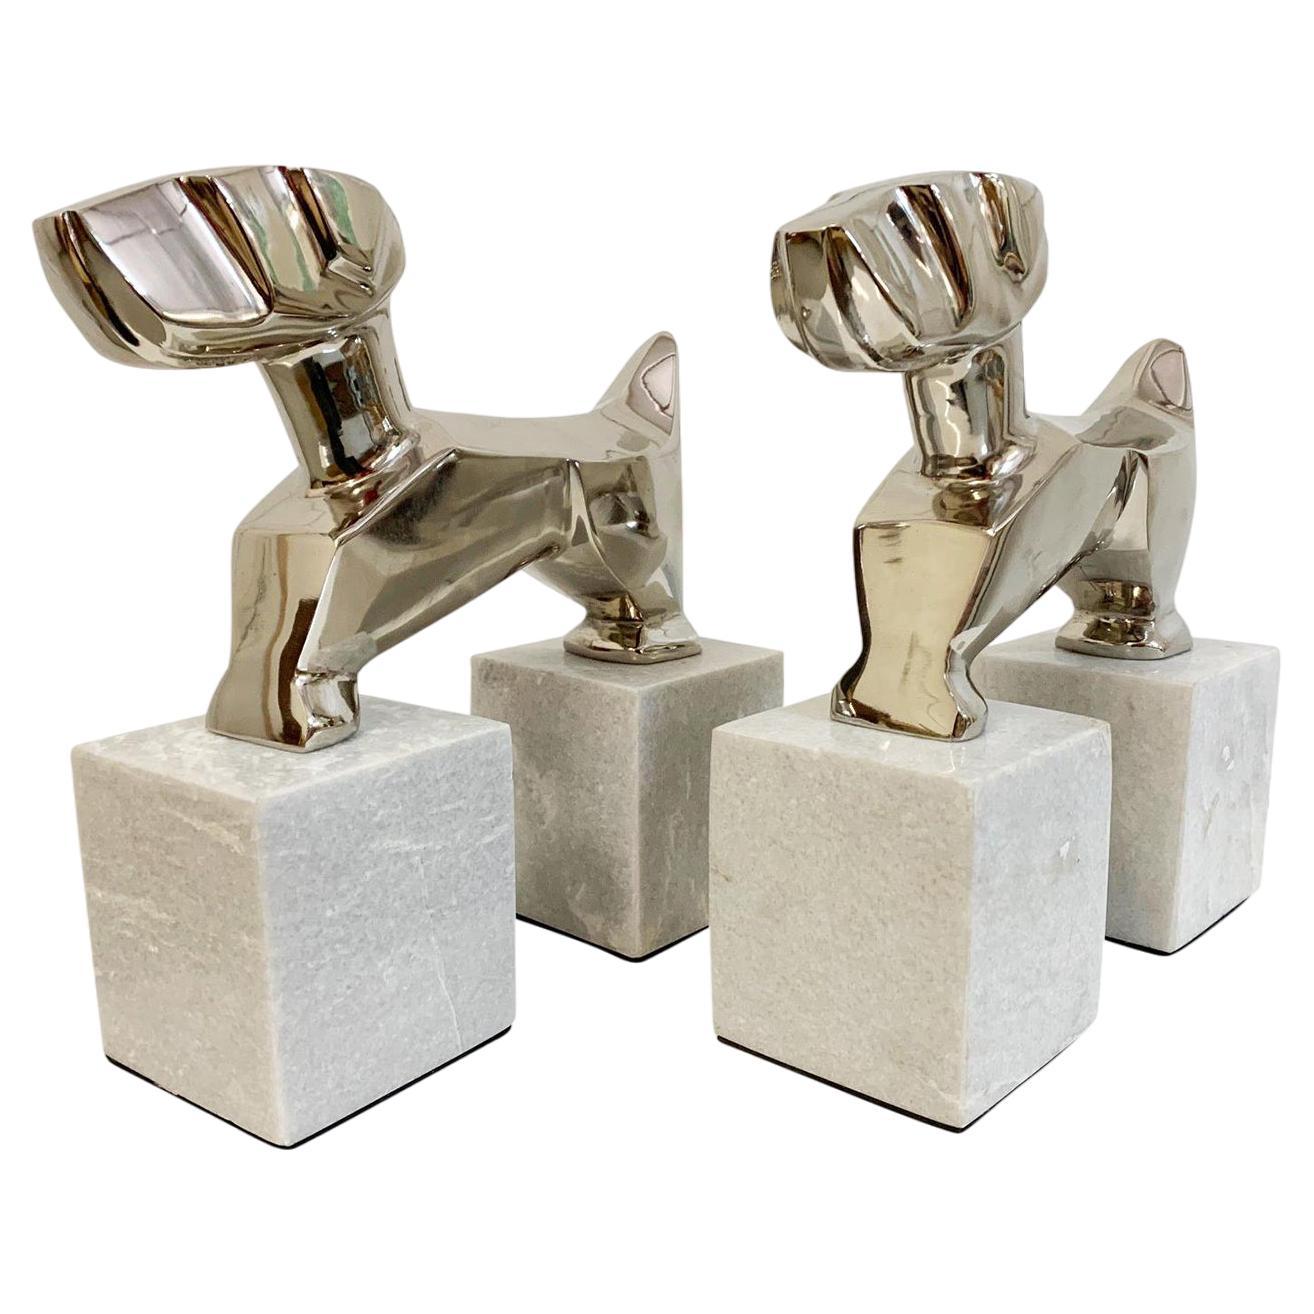 Modernist Art Deco Chrome Terrier Statues in the Manner of Nikolsky For Sale